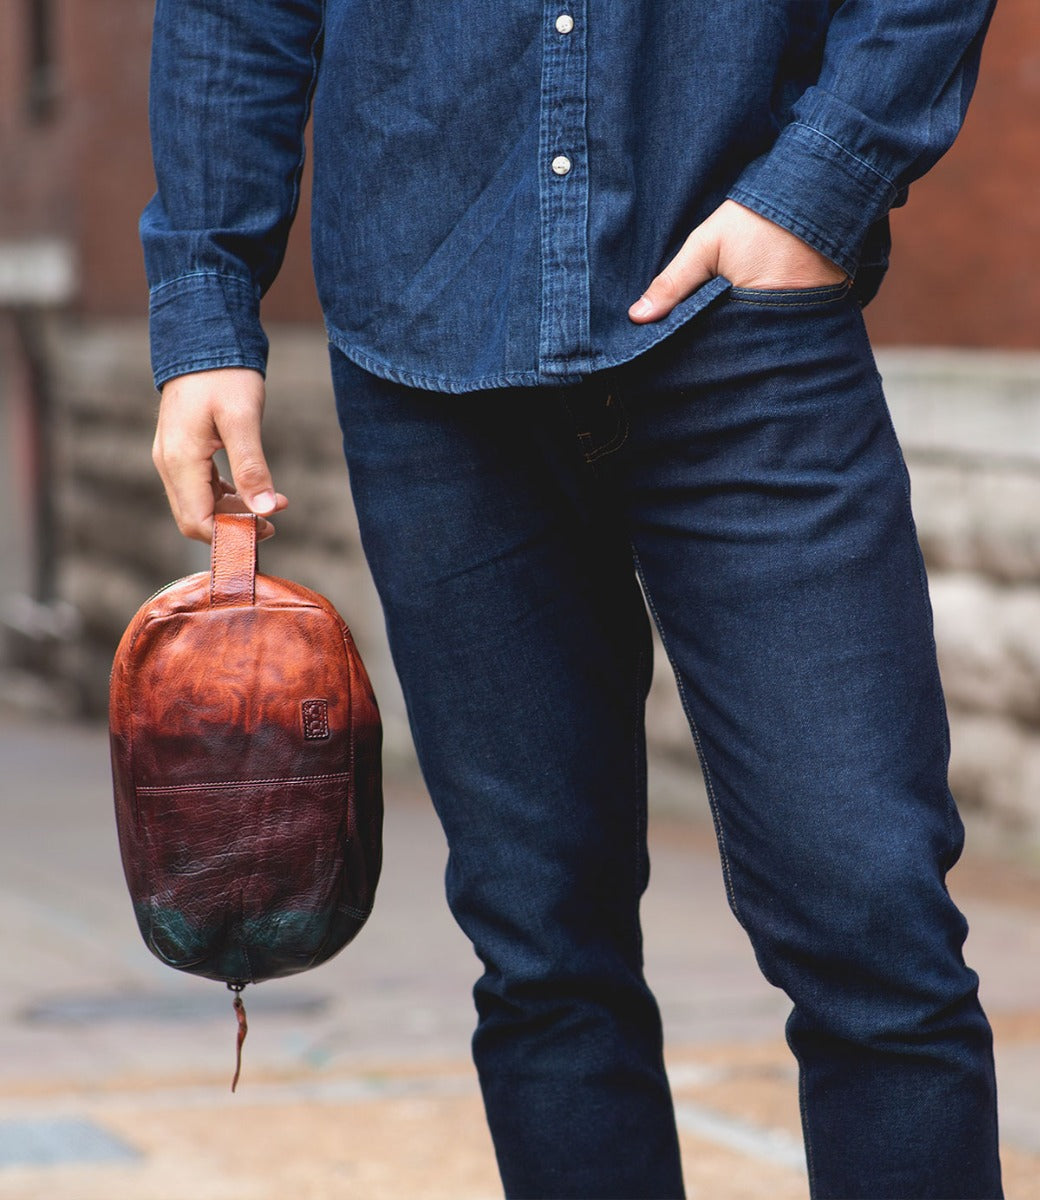 A man in jeans holding a Bed Stu Yatra leather bag.